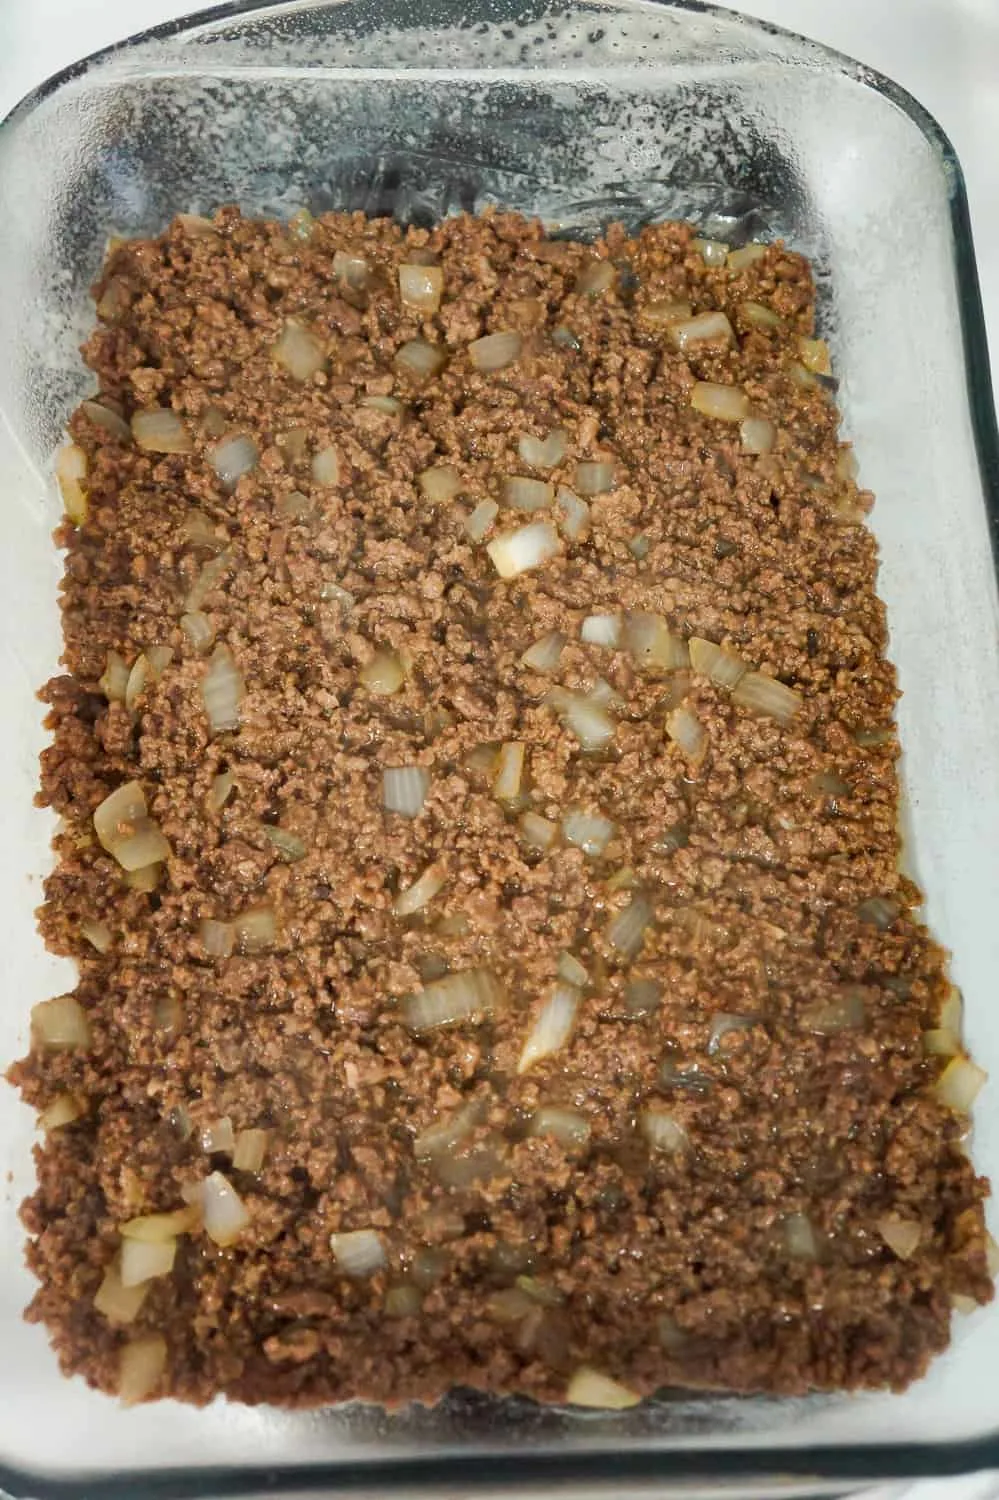 cooked ground beef and diced onions in a baking dish